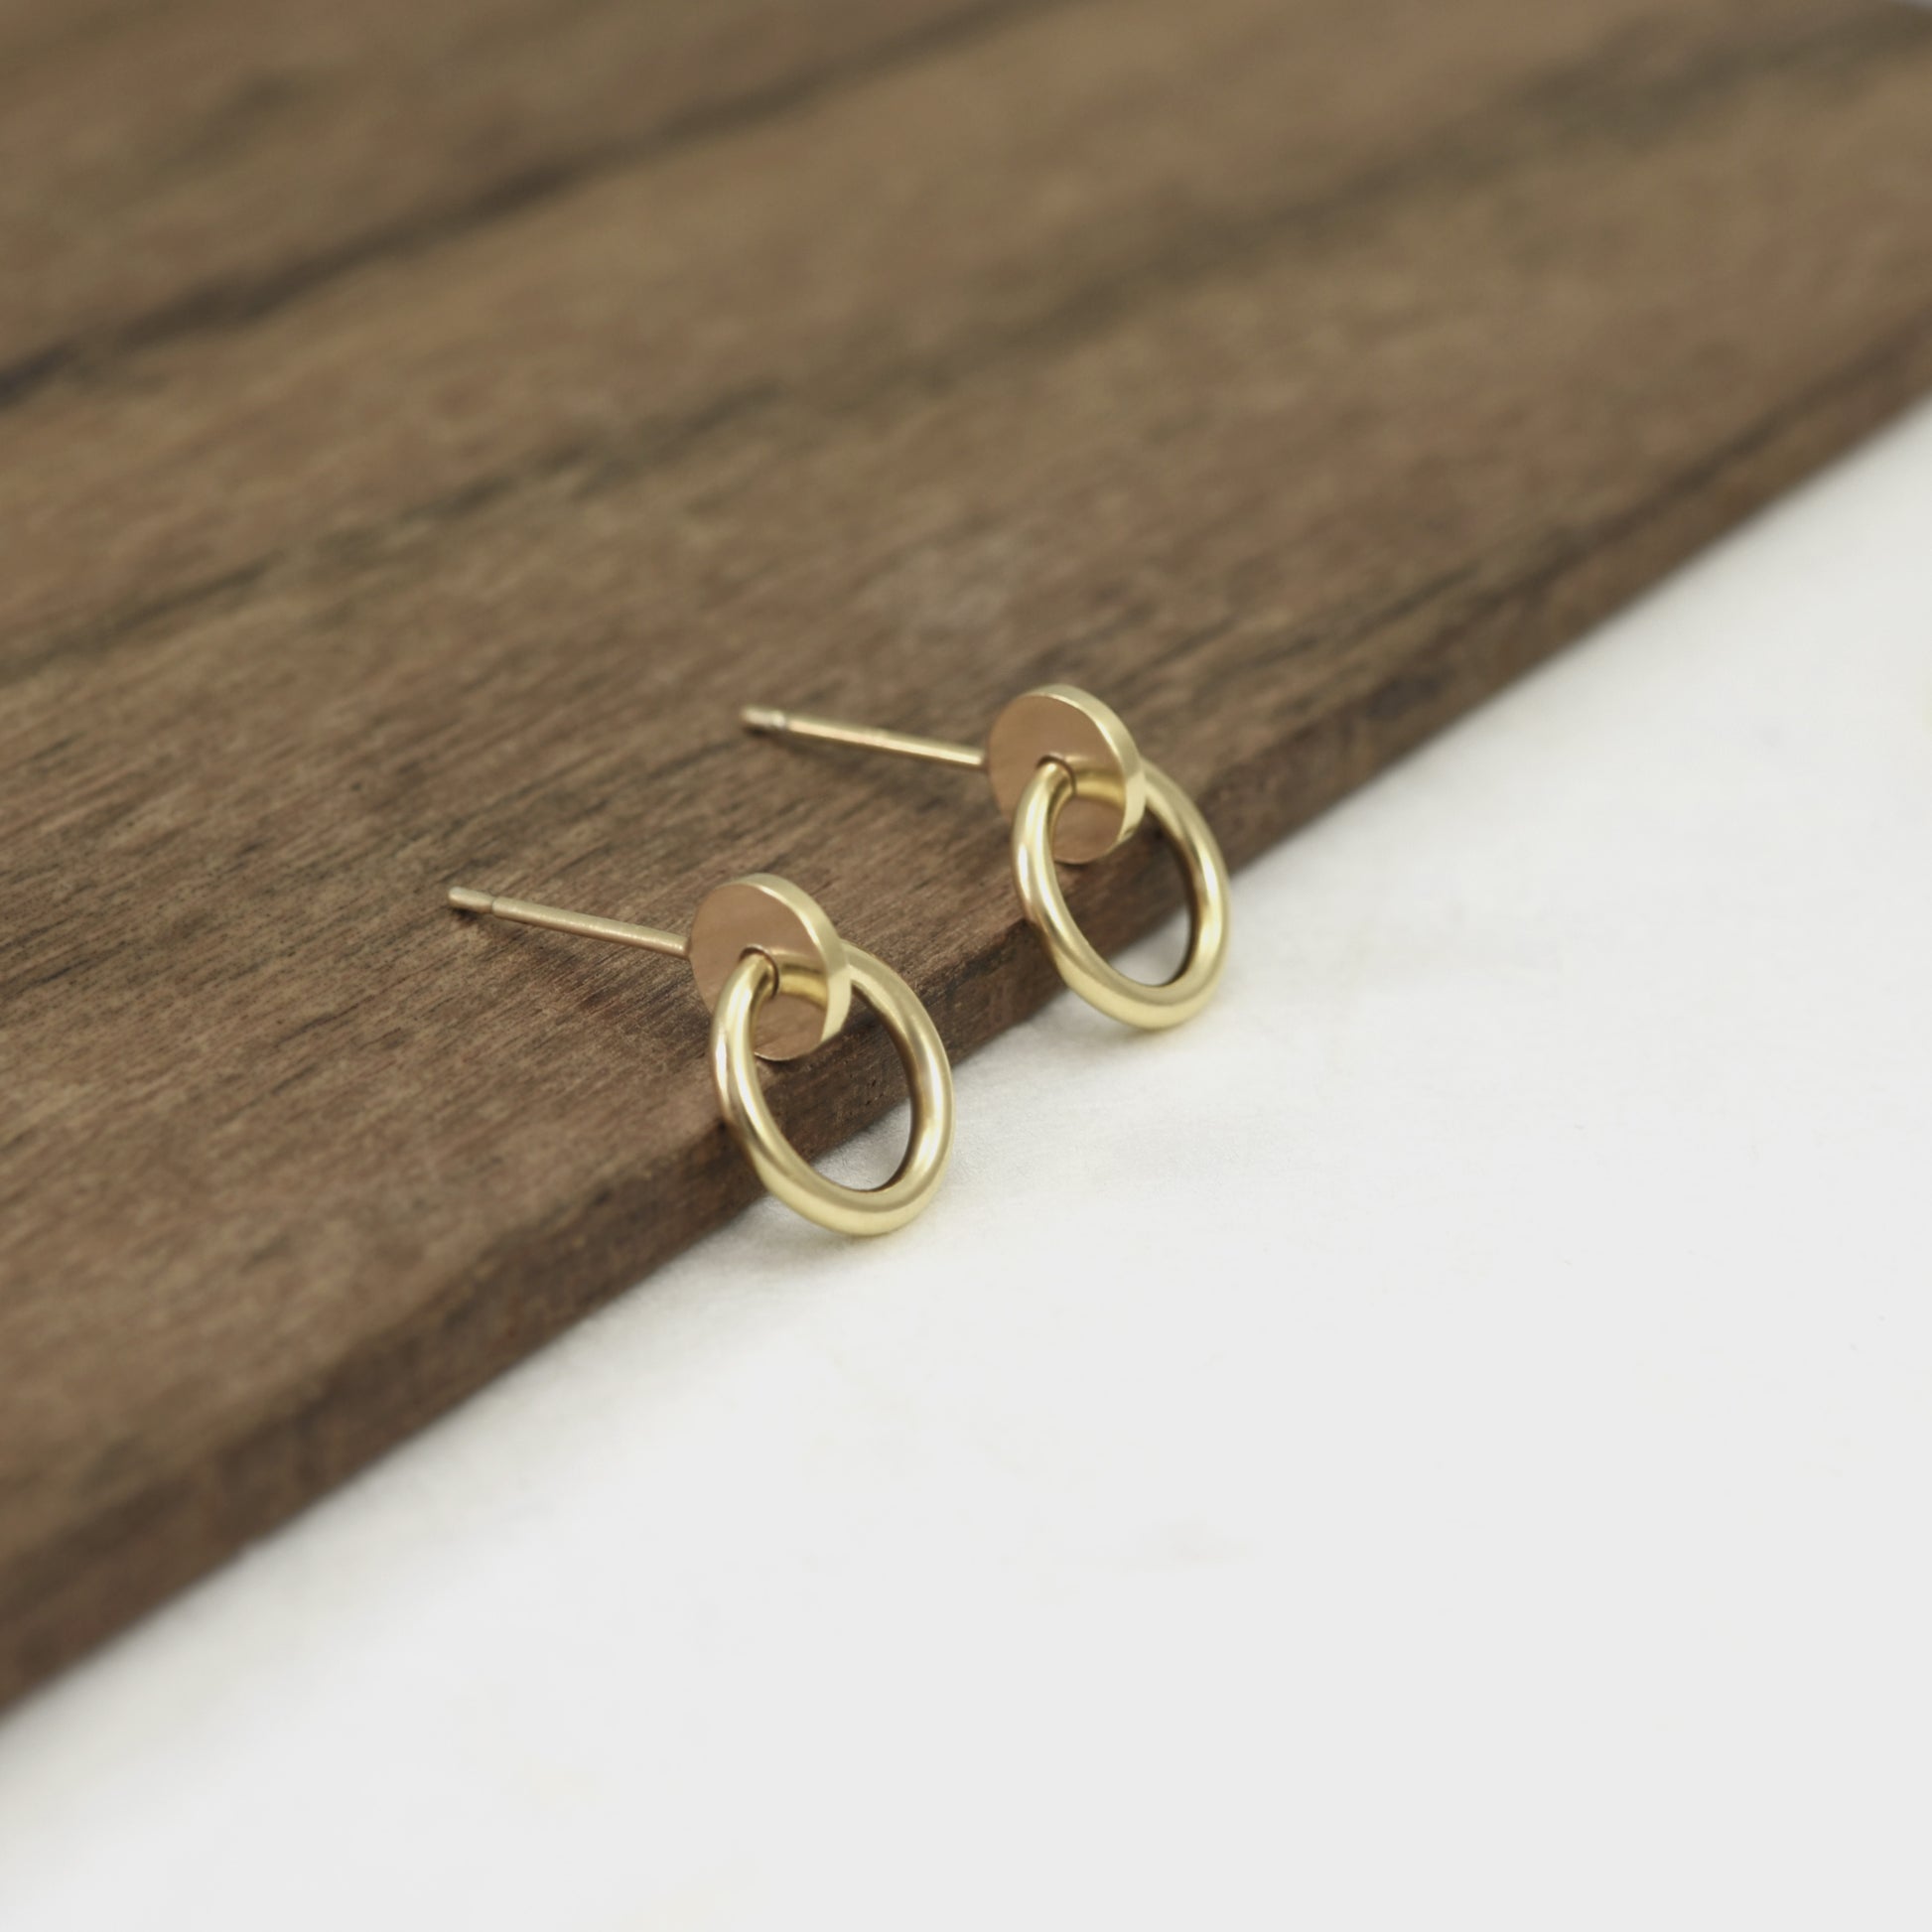 The beauty of these geometric earrings by AgJc